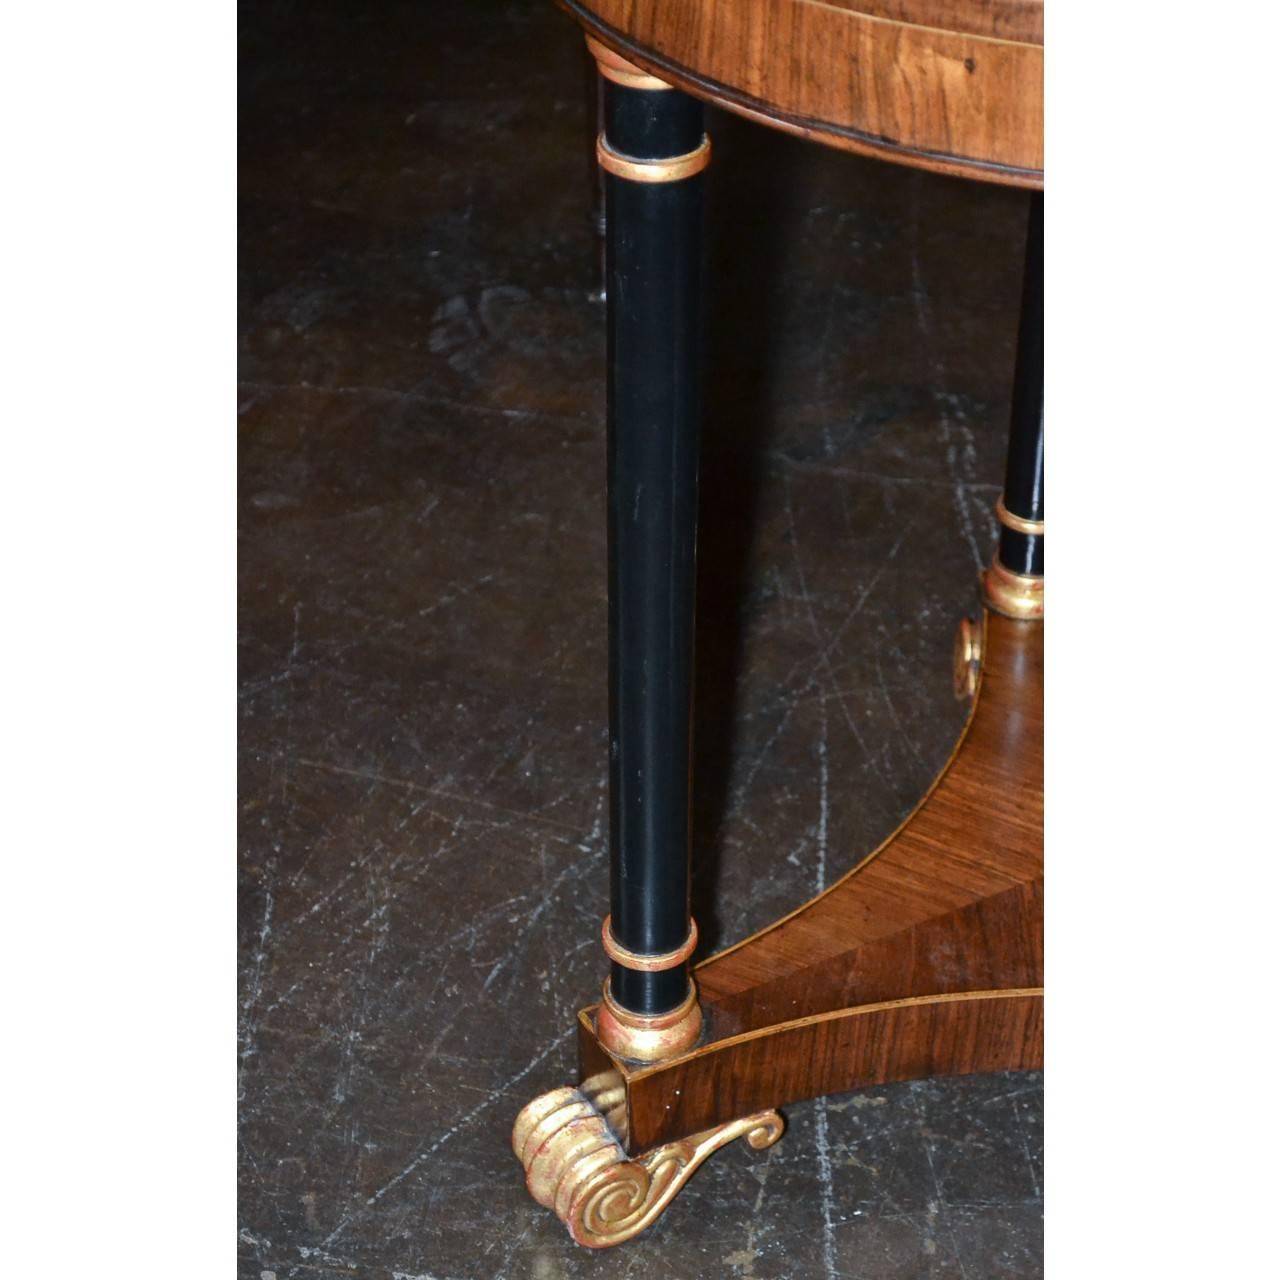 Superb 19th century English Regency rosewood circular top side table on turned ebonized columns with gilt trim accents and a tri-concave base. The entire on gold gilded acanthus scrolled feet,

circa 1890.